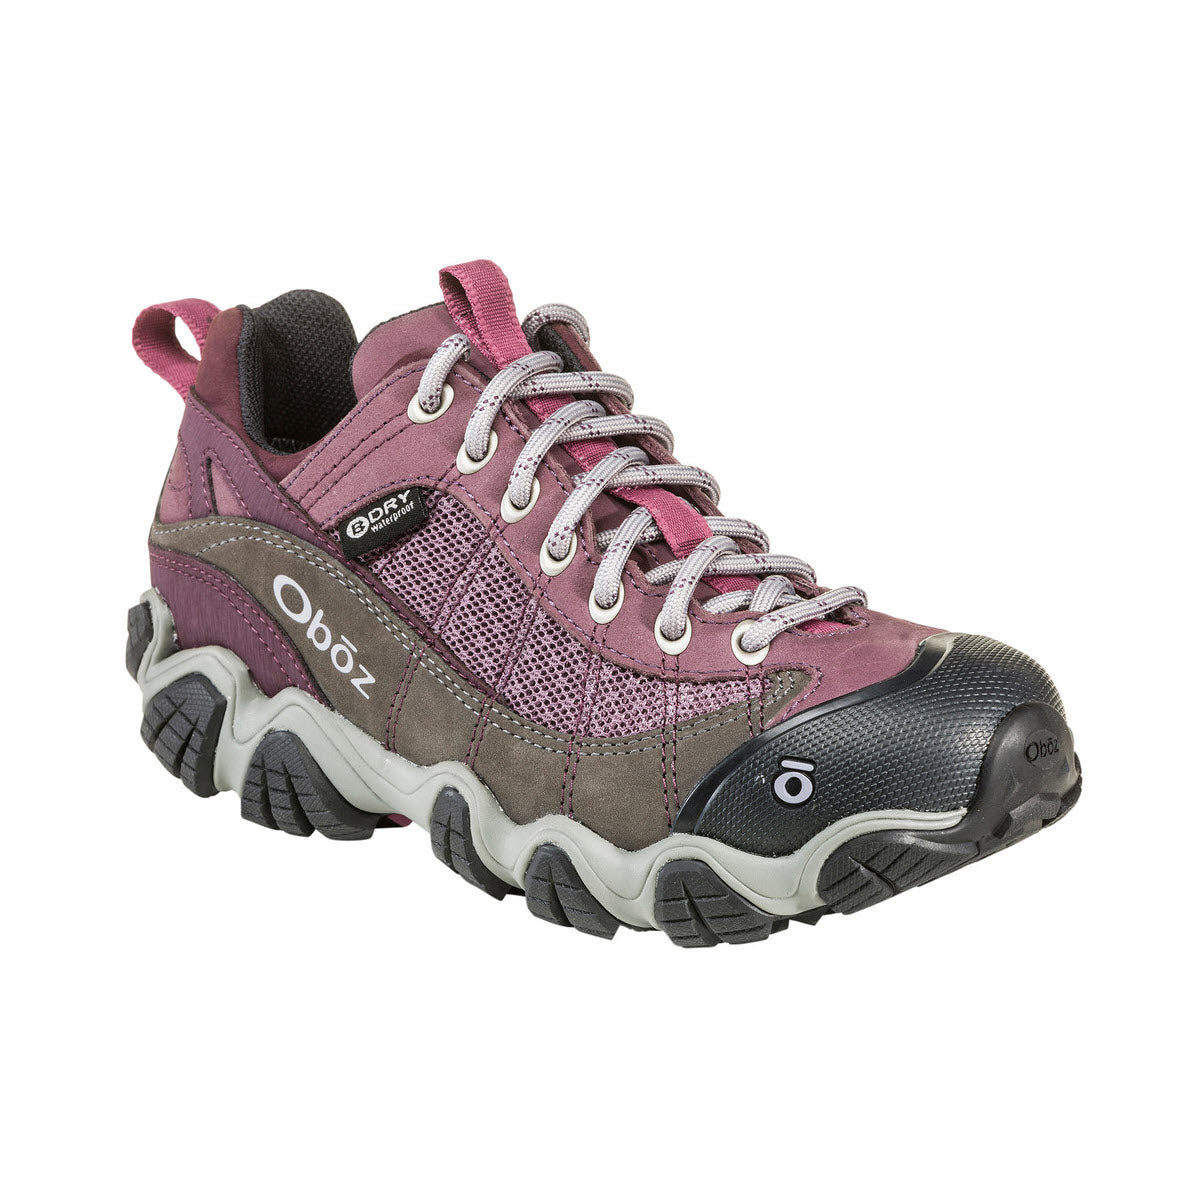 A single waterproof Oboz Firebrand II Low B Dry Lilac hiking shoe in pink and gray colors with mesh panels and robust sole.